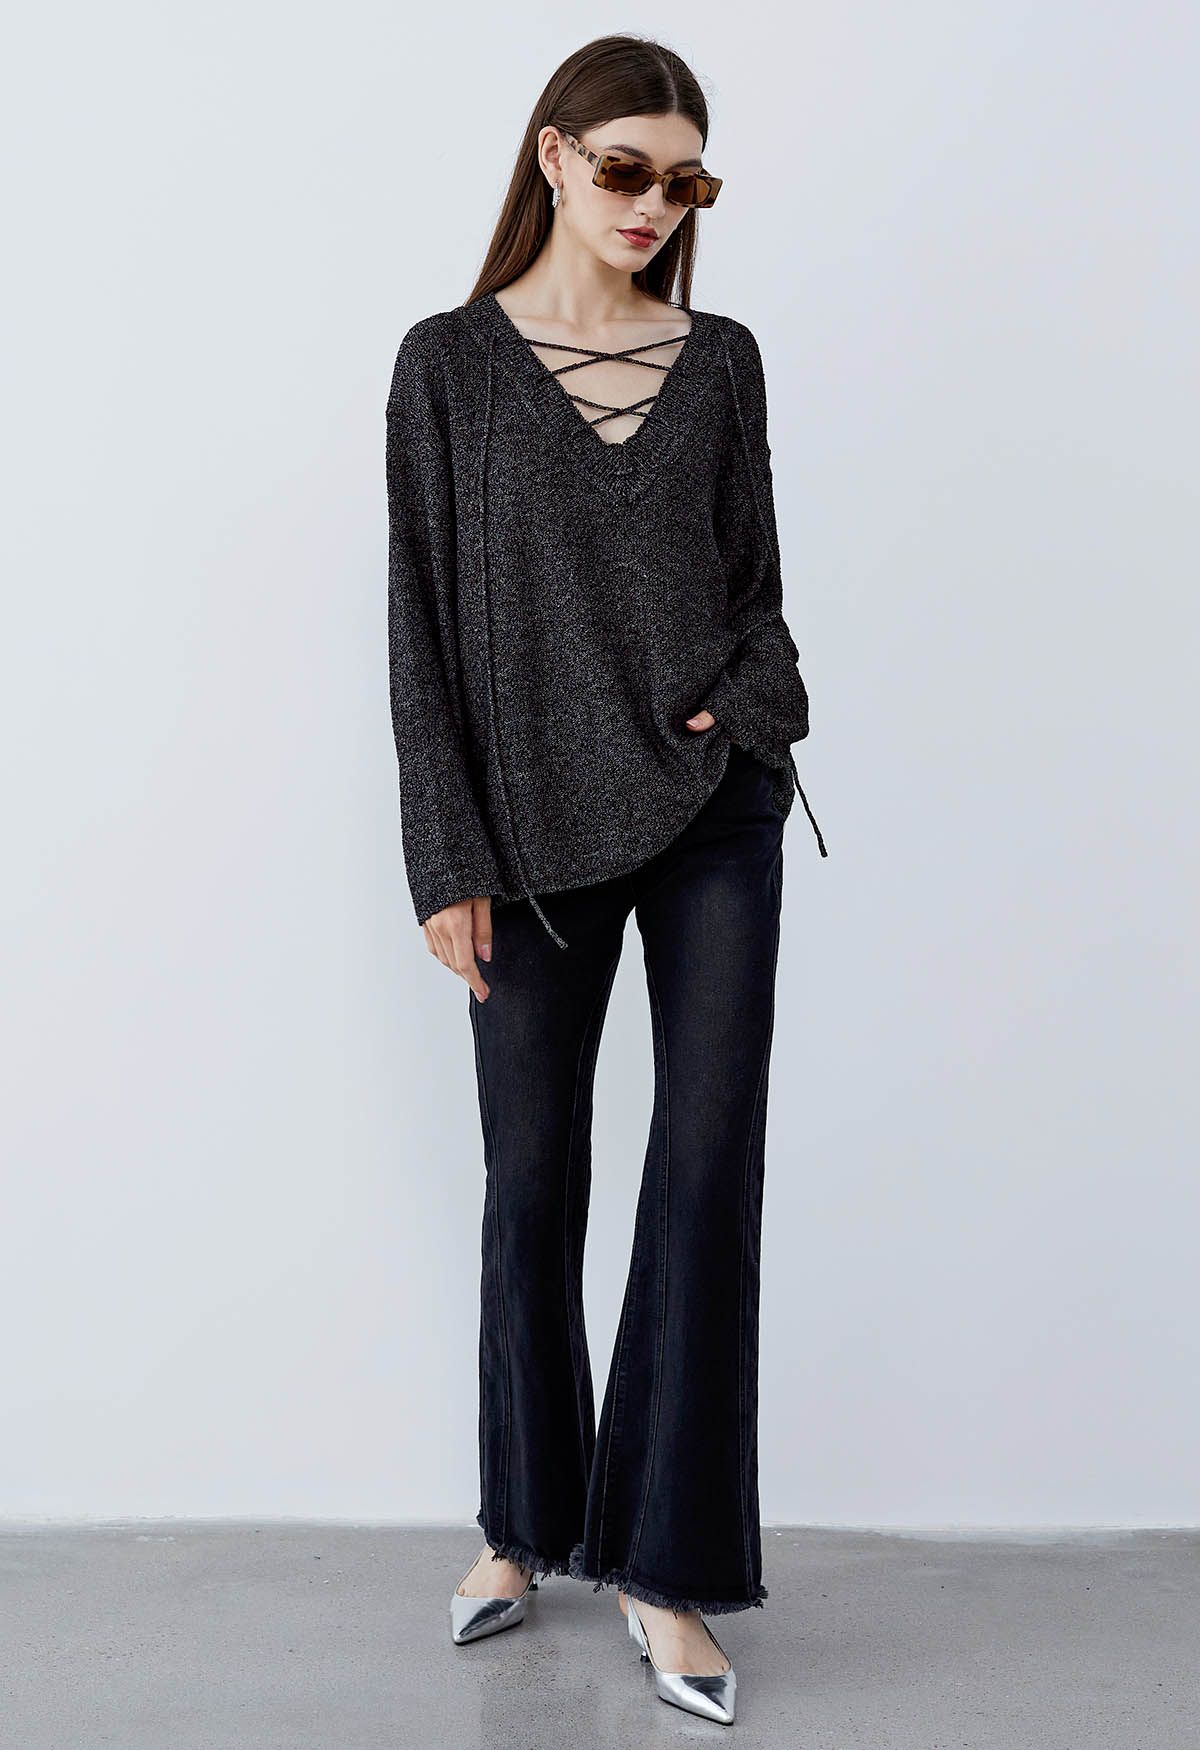 Slouchy V-Neck Lace-Up Knit Sweater in Black